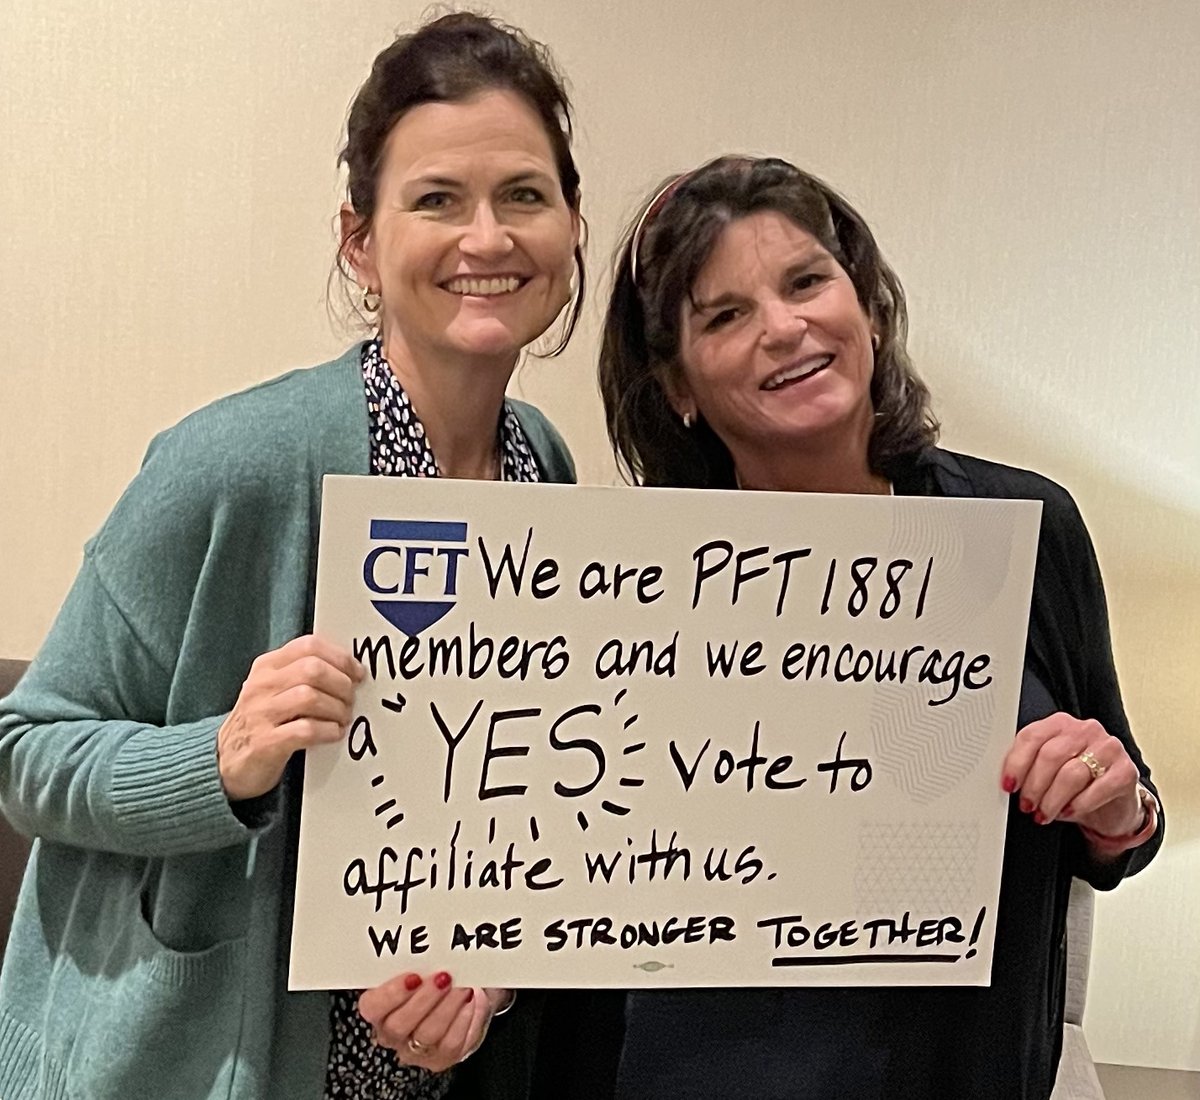 CFT leaders from @PFT1881 show their support for fellow educators who are organizing to form new unions with CFT, including faculty from Pasadena City College. Being part of a union means standing together for the future of our students, our schools, and our profession! ✊✊✊